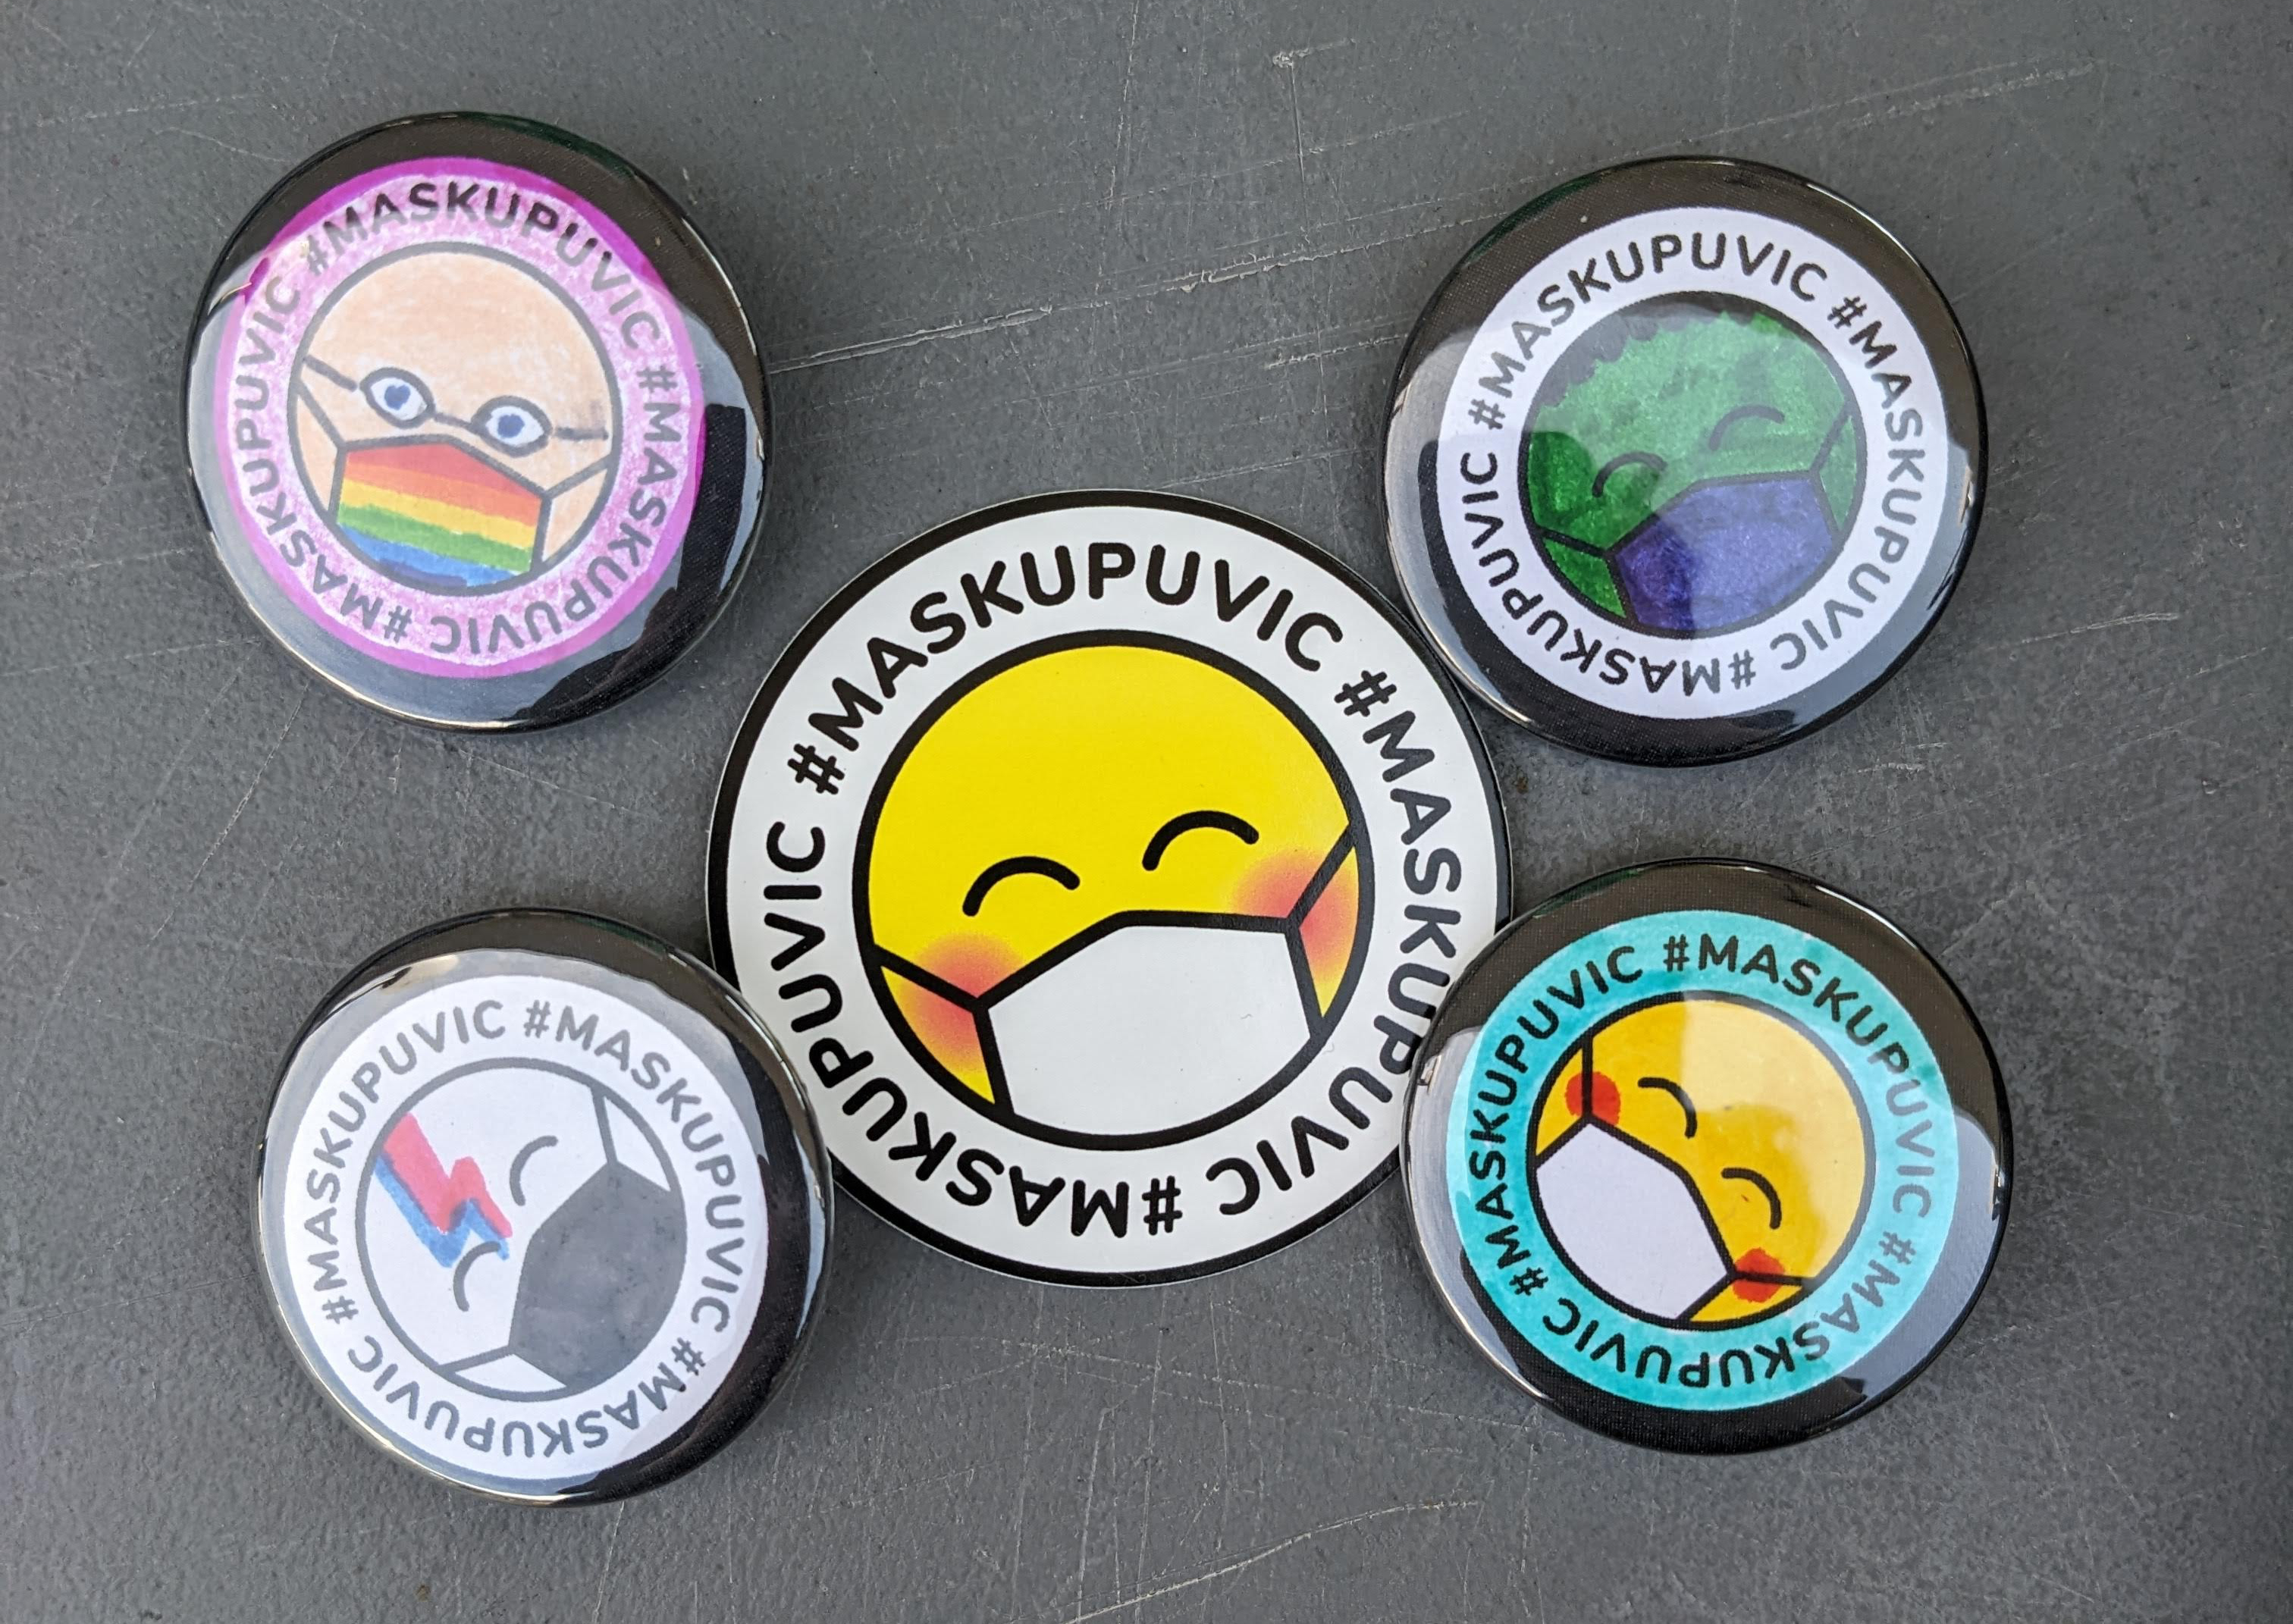 A #MaskUpUVic sticker in yellow surrounded by 4 custom coloured pins: the hulk, yellow and teal, David Bowie, and pride mask with glasses.